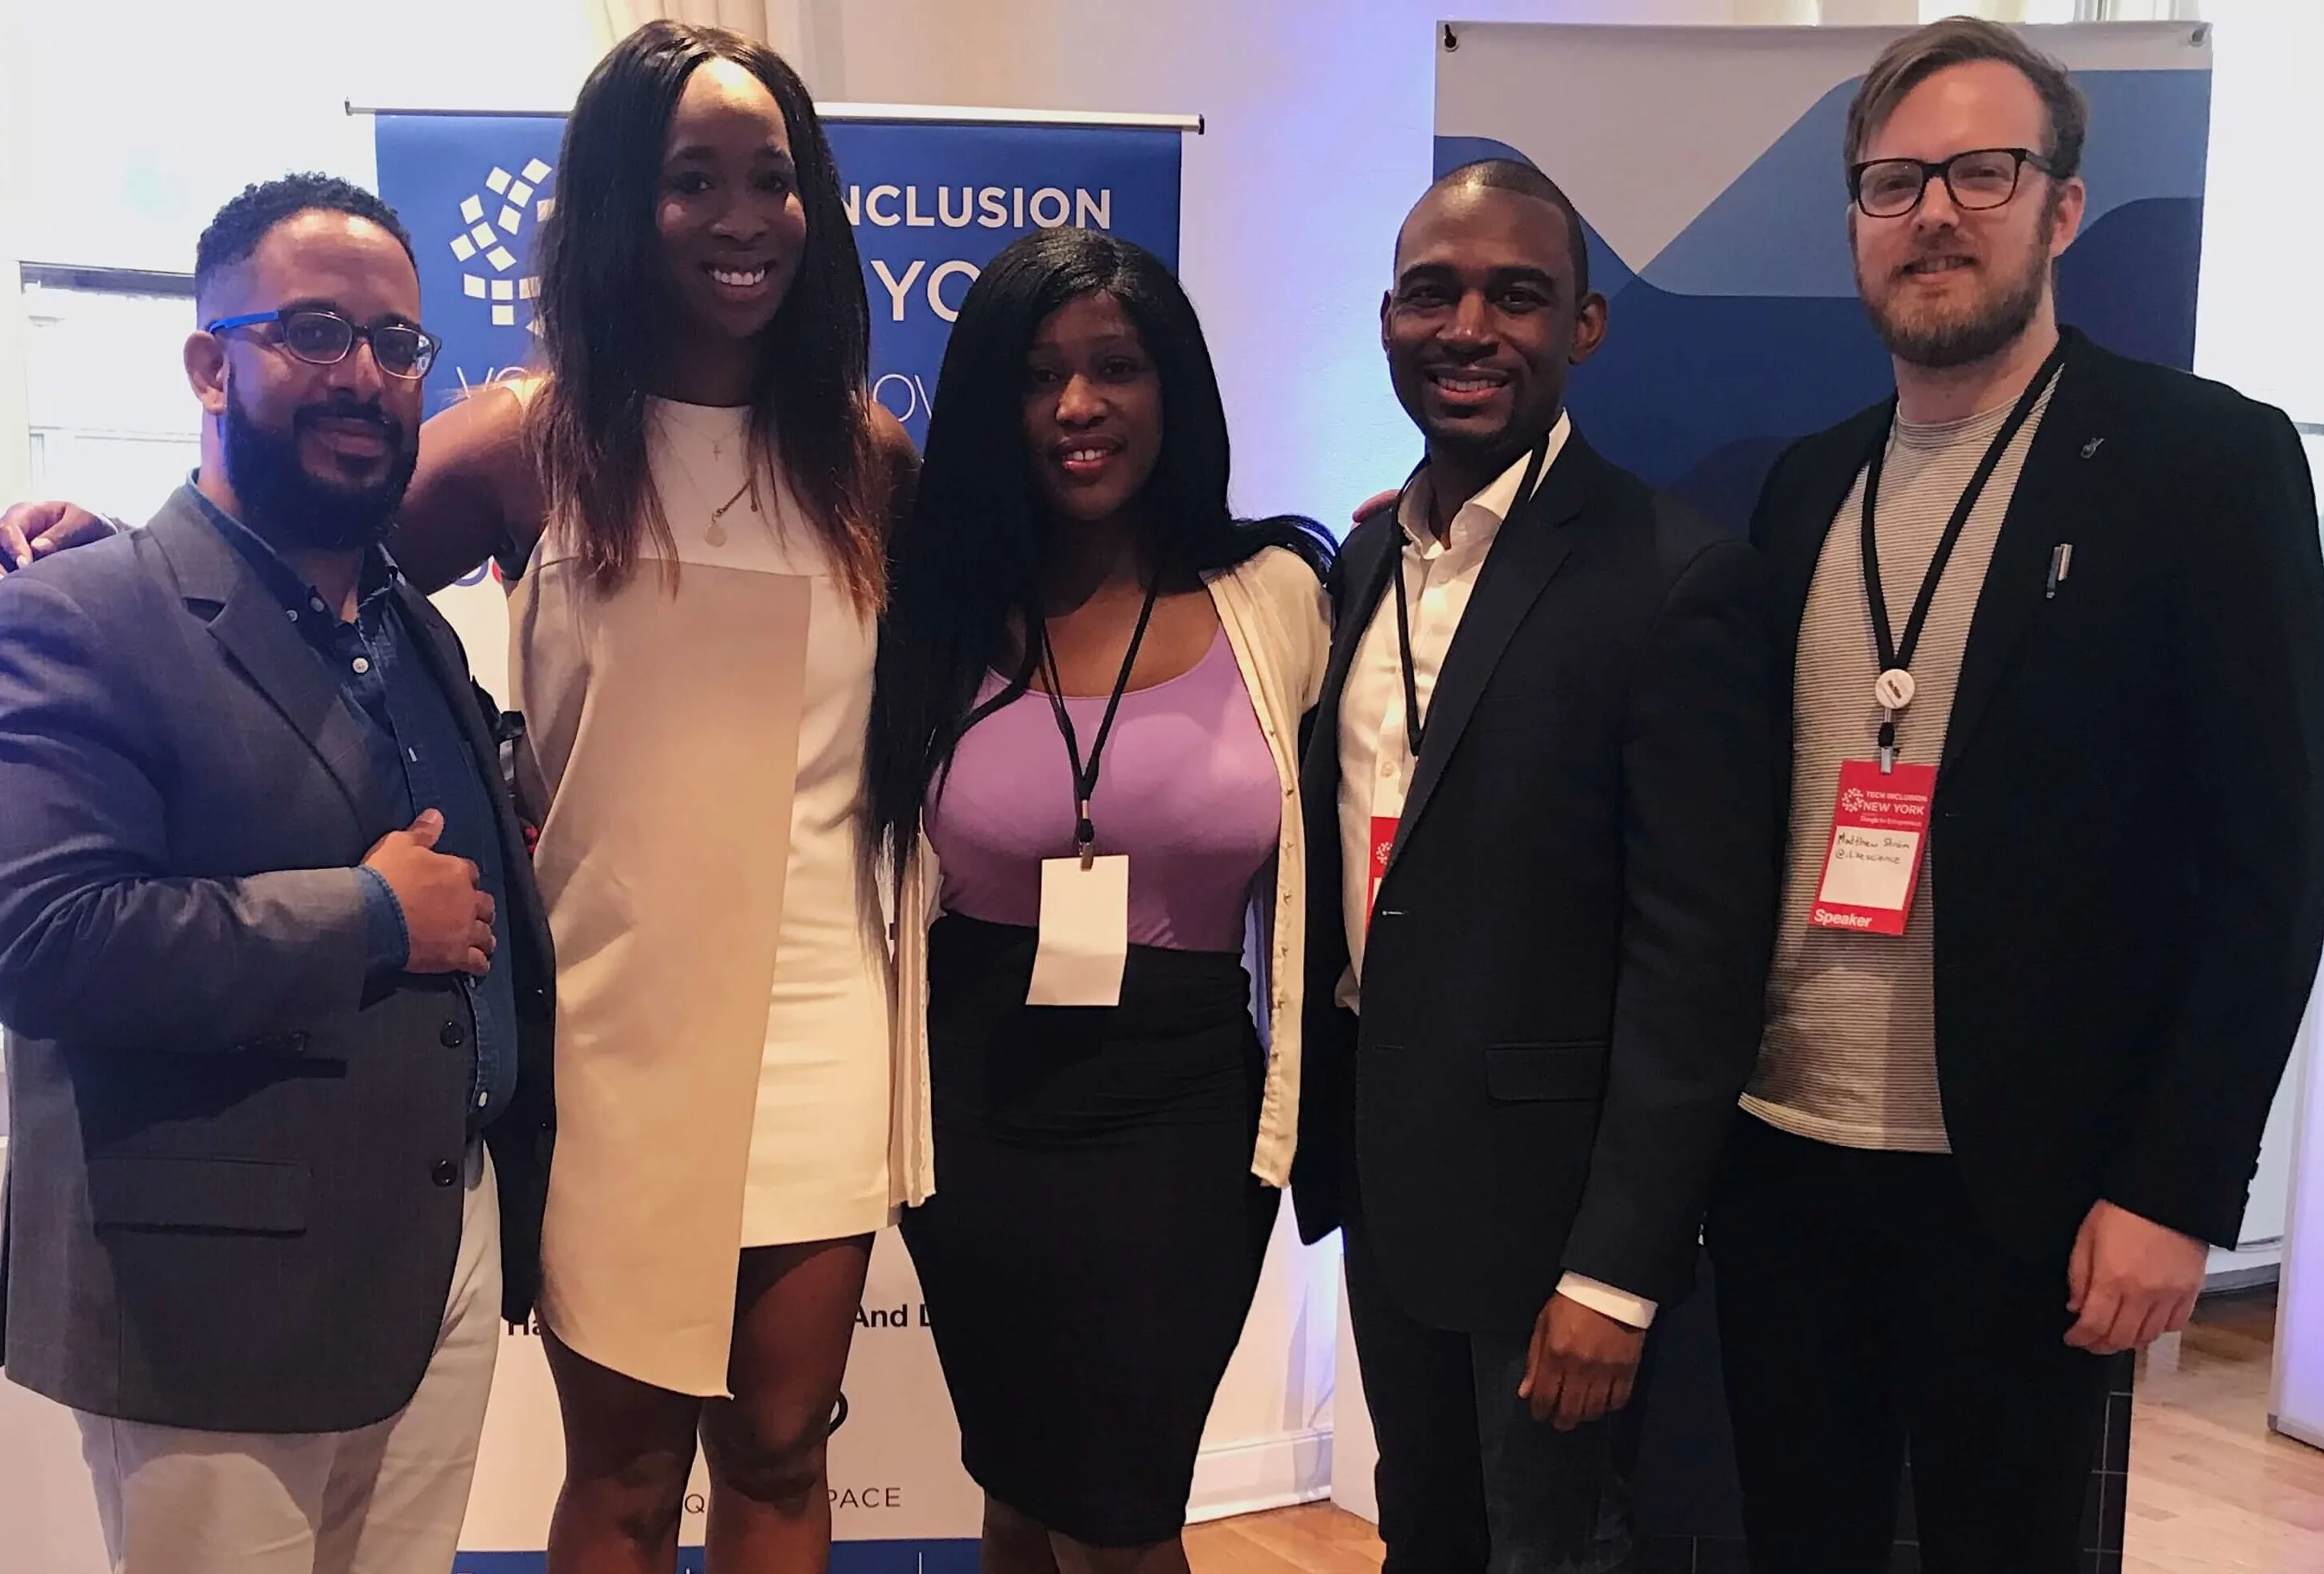 Touchlab Partner Jeff Namnum @ Tech Inclusion NYC 2018